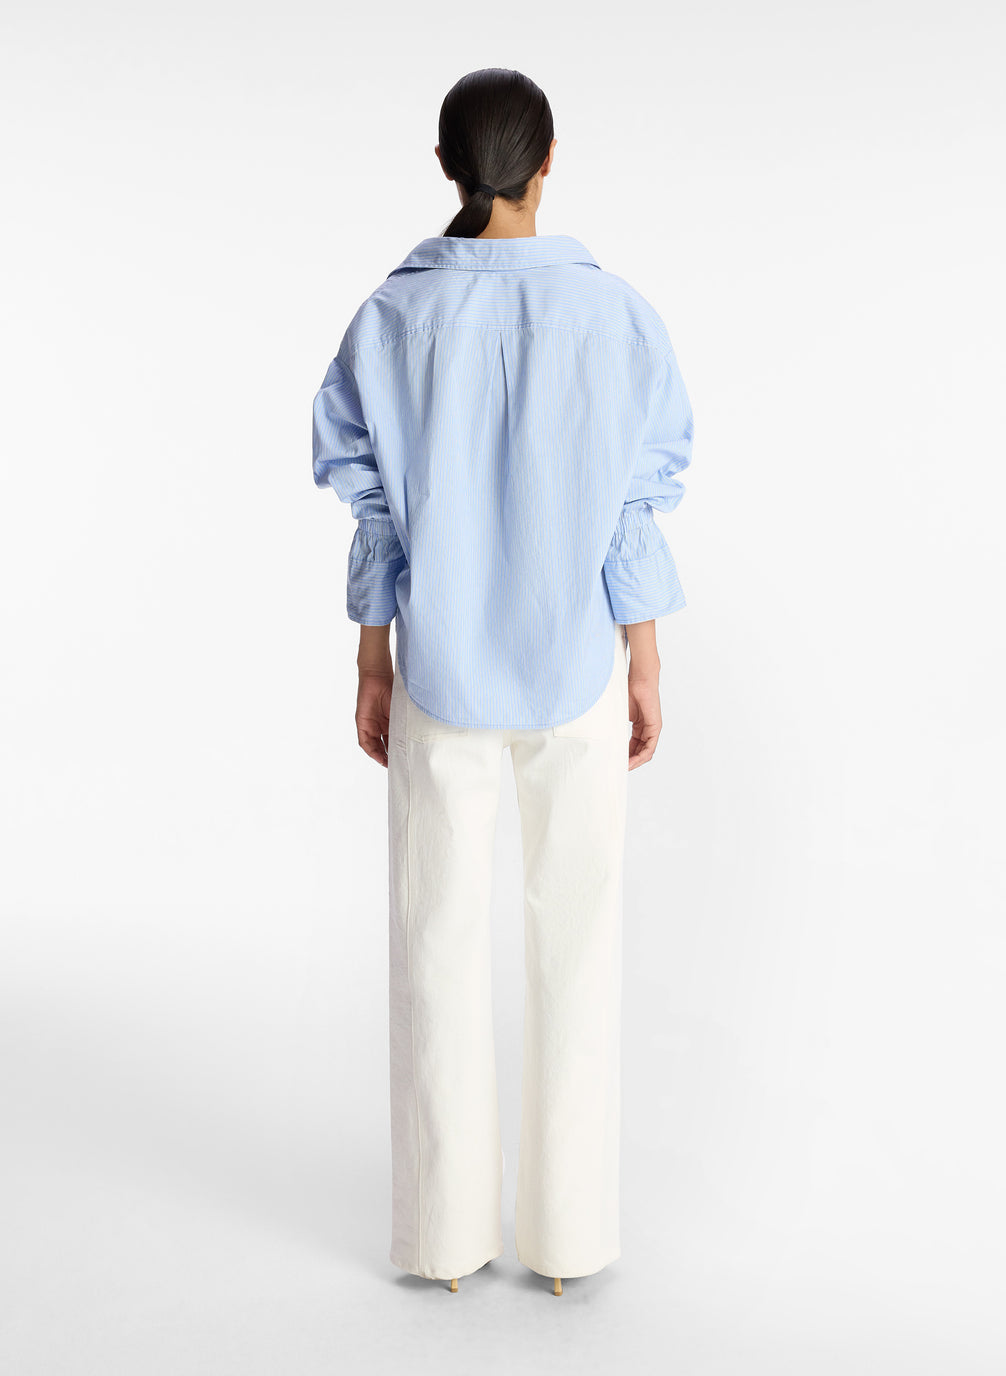 back view of woman wearing light blue striped oversized button down shirt and white pants